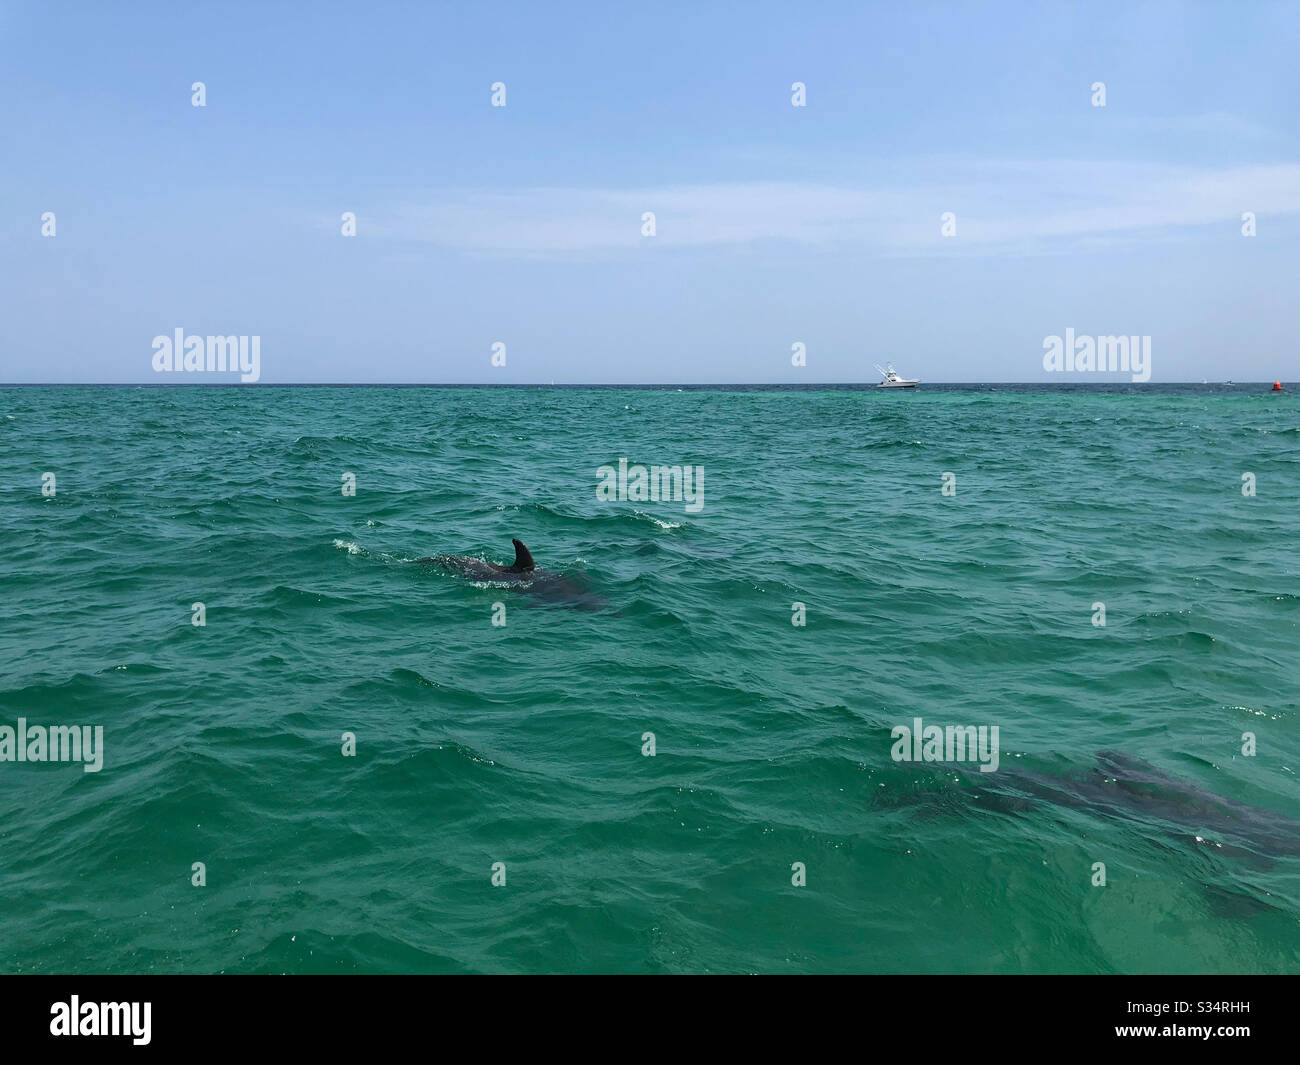 Dolphins swimming in emerald water of the Gulf of Mexico Florida Stock Photo